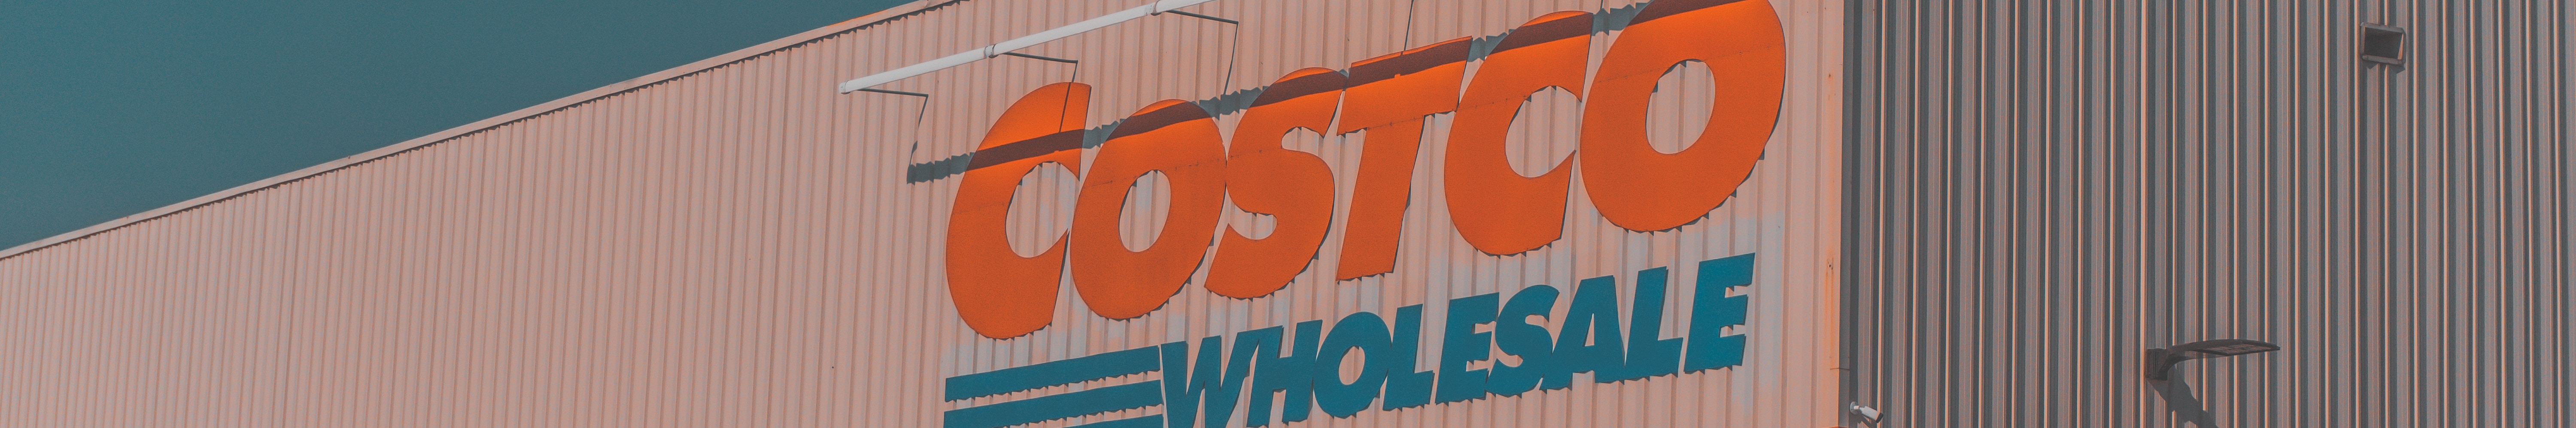 In 2022, Costco's water usage was 16.5 million m3 without disclosing its recycling rate